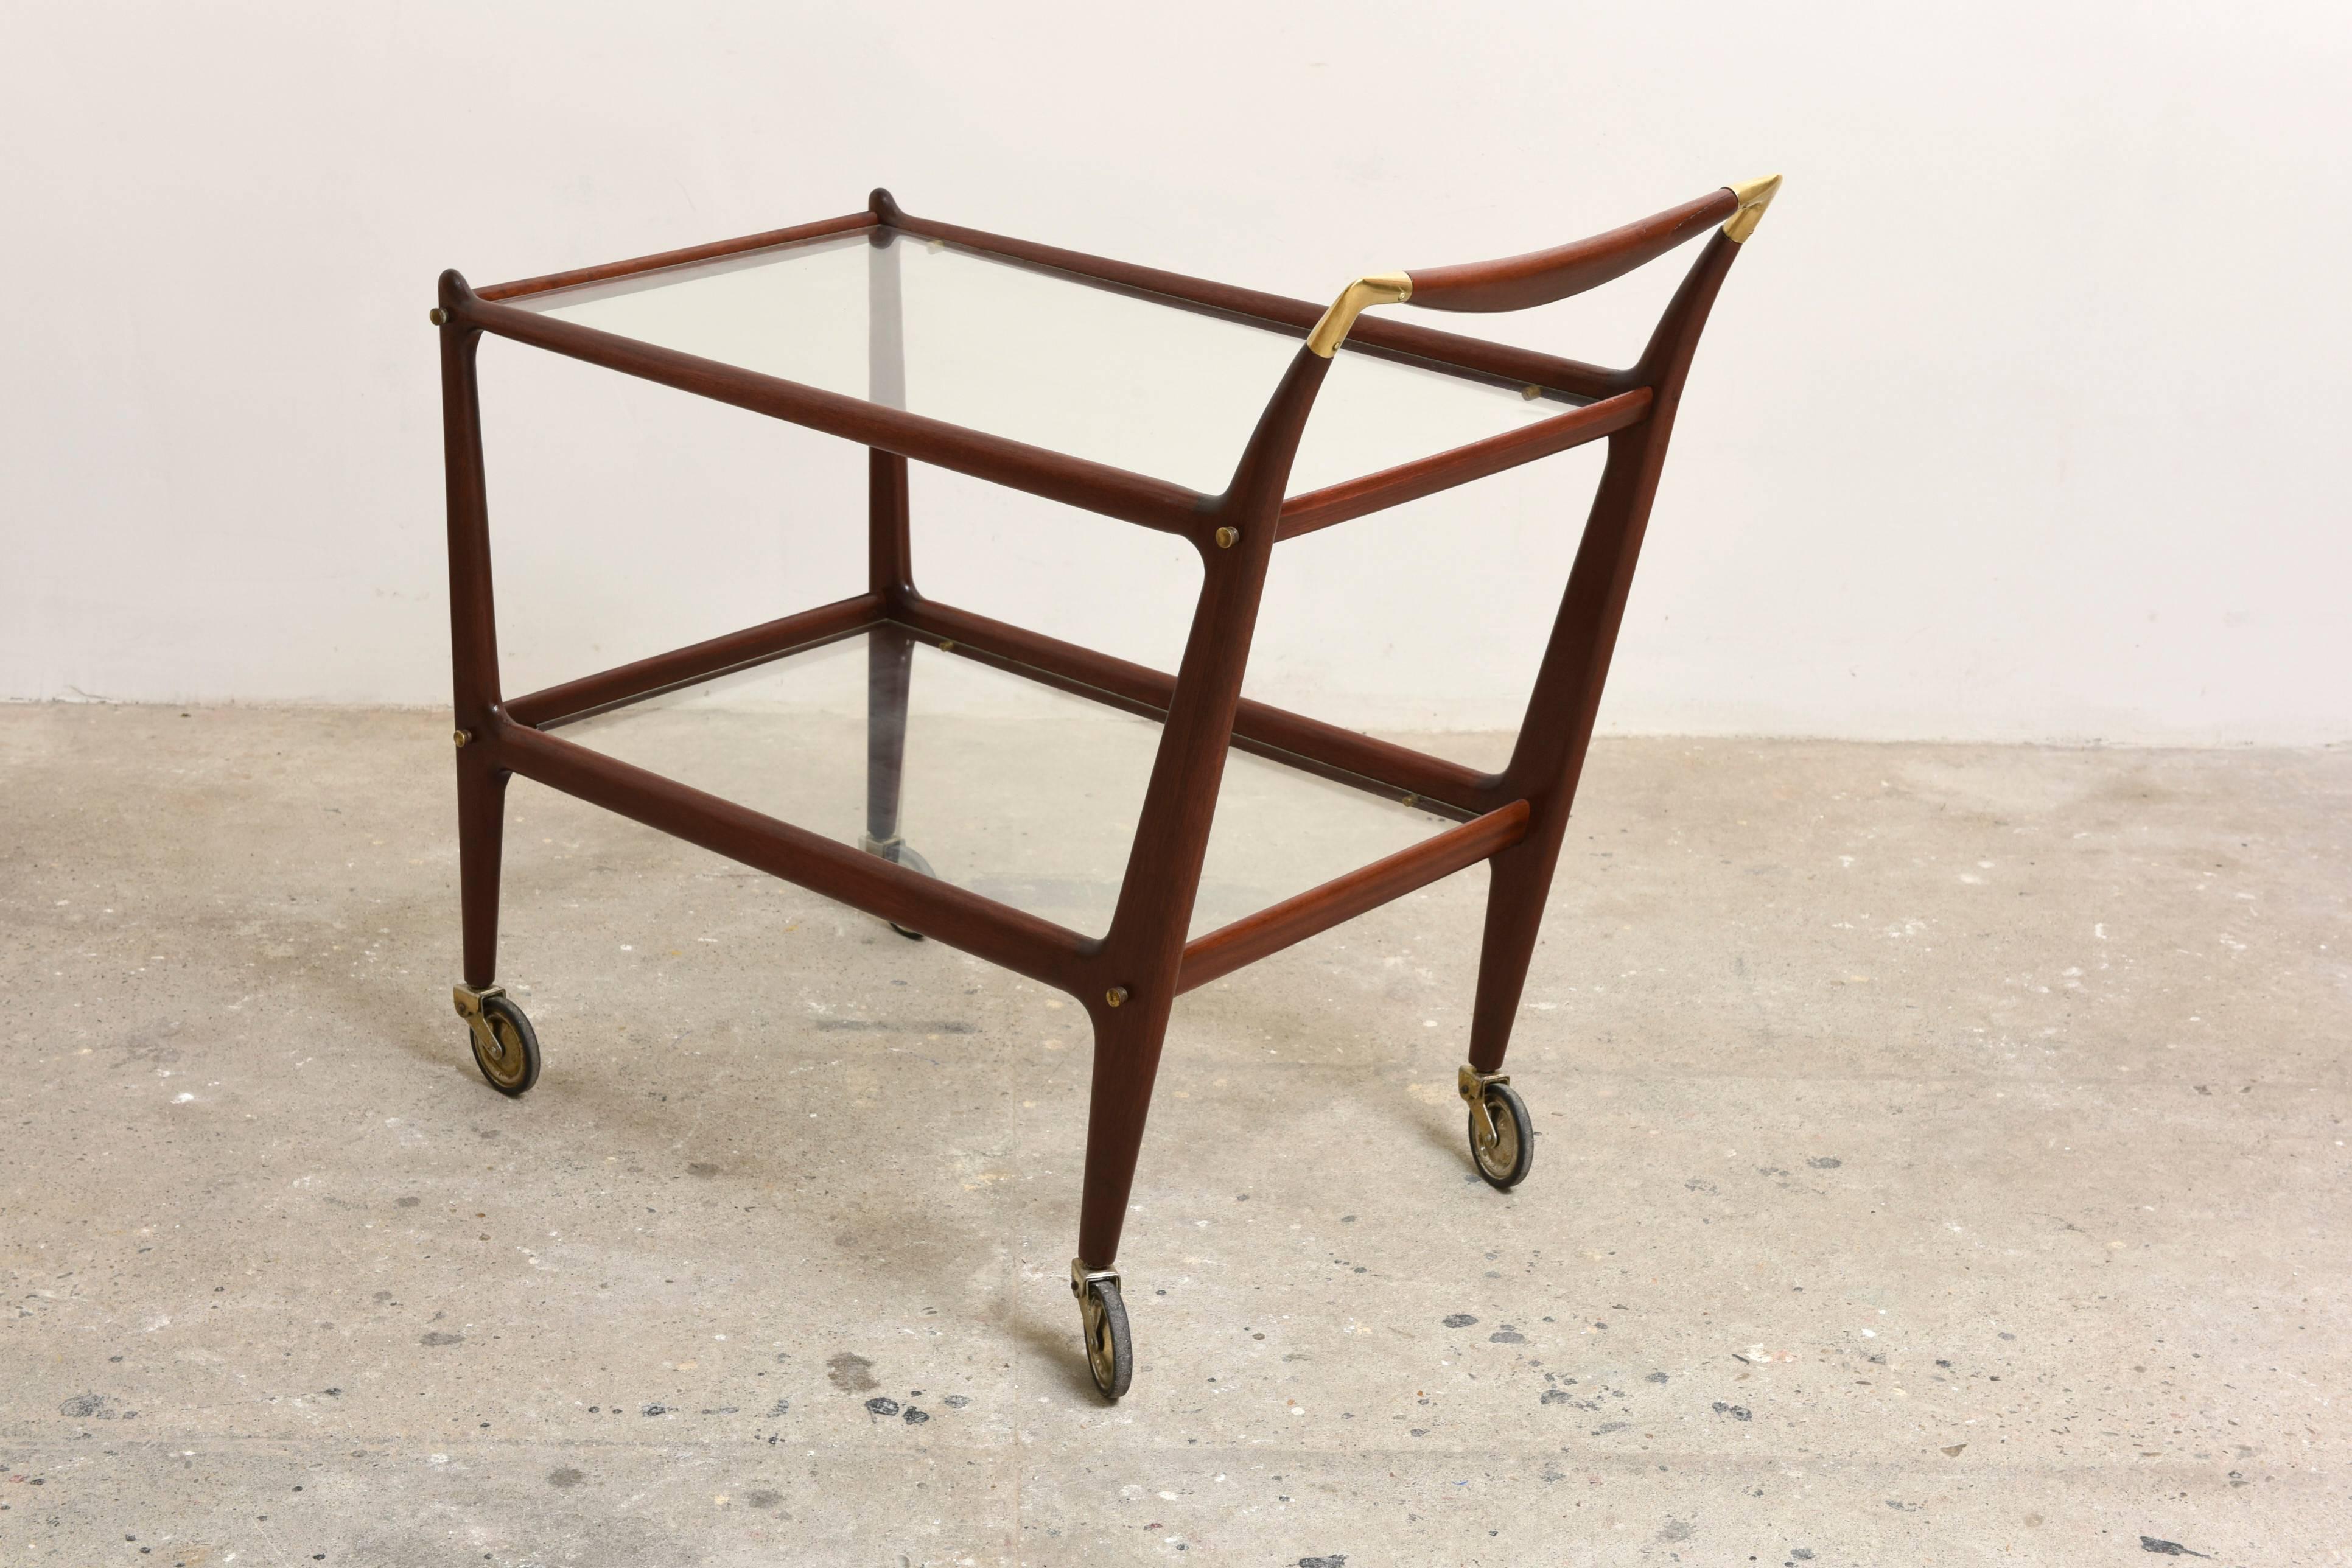 Iconic bar cart by Italian designer Cesare Lacca. 

Brass and walnut frame with original castors, in mint condition.